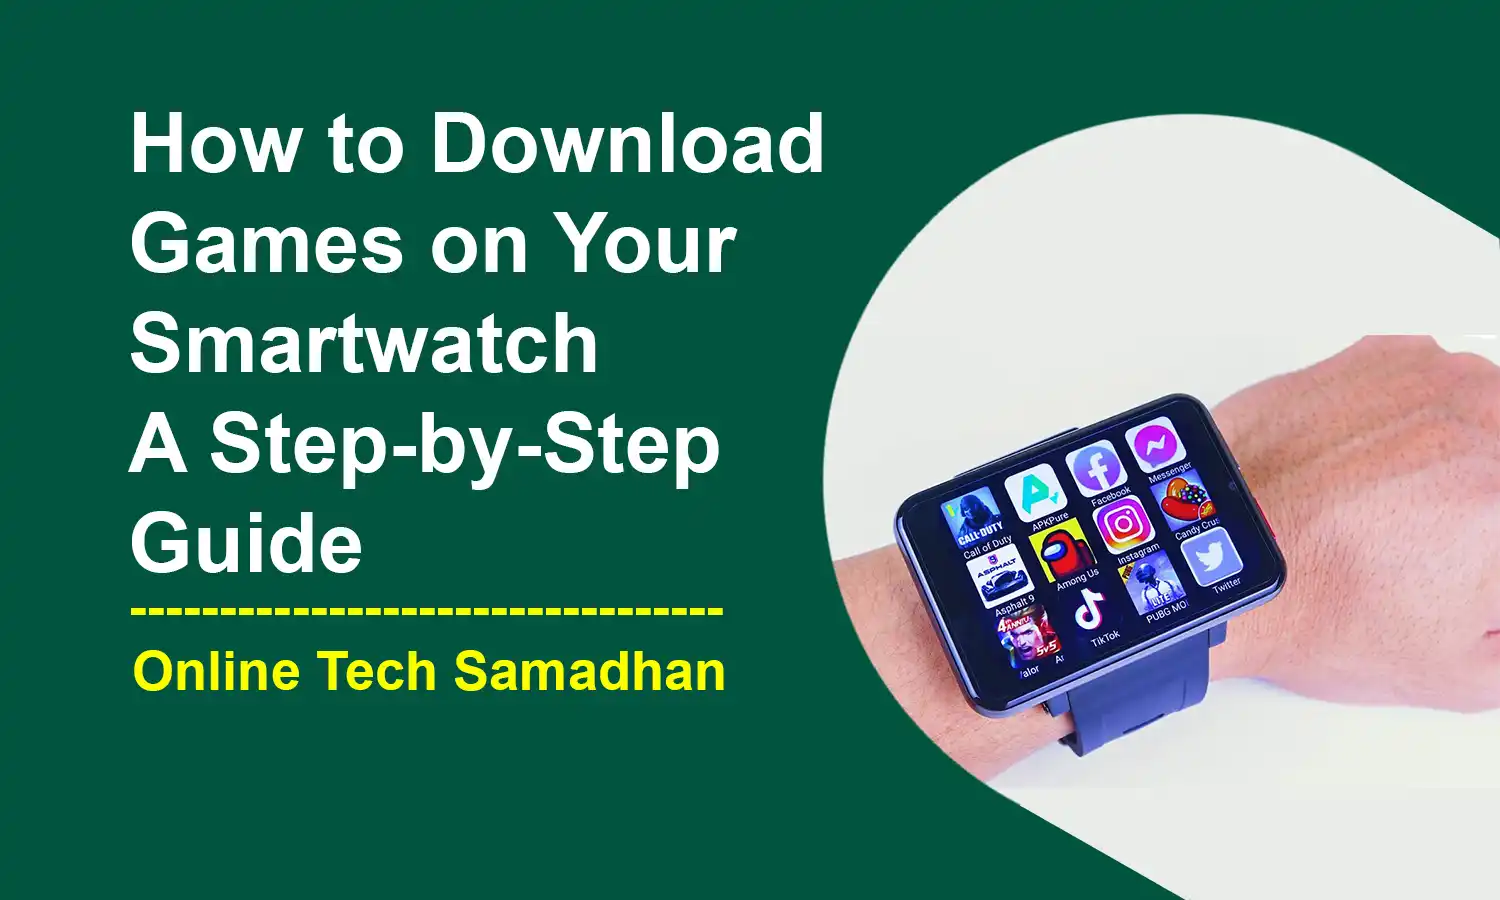 How to Download Games on Your Smartwatch